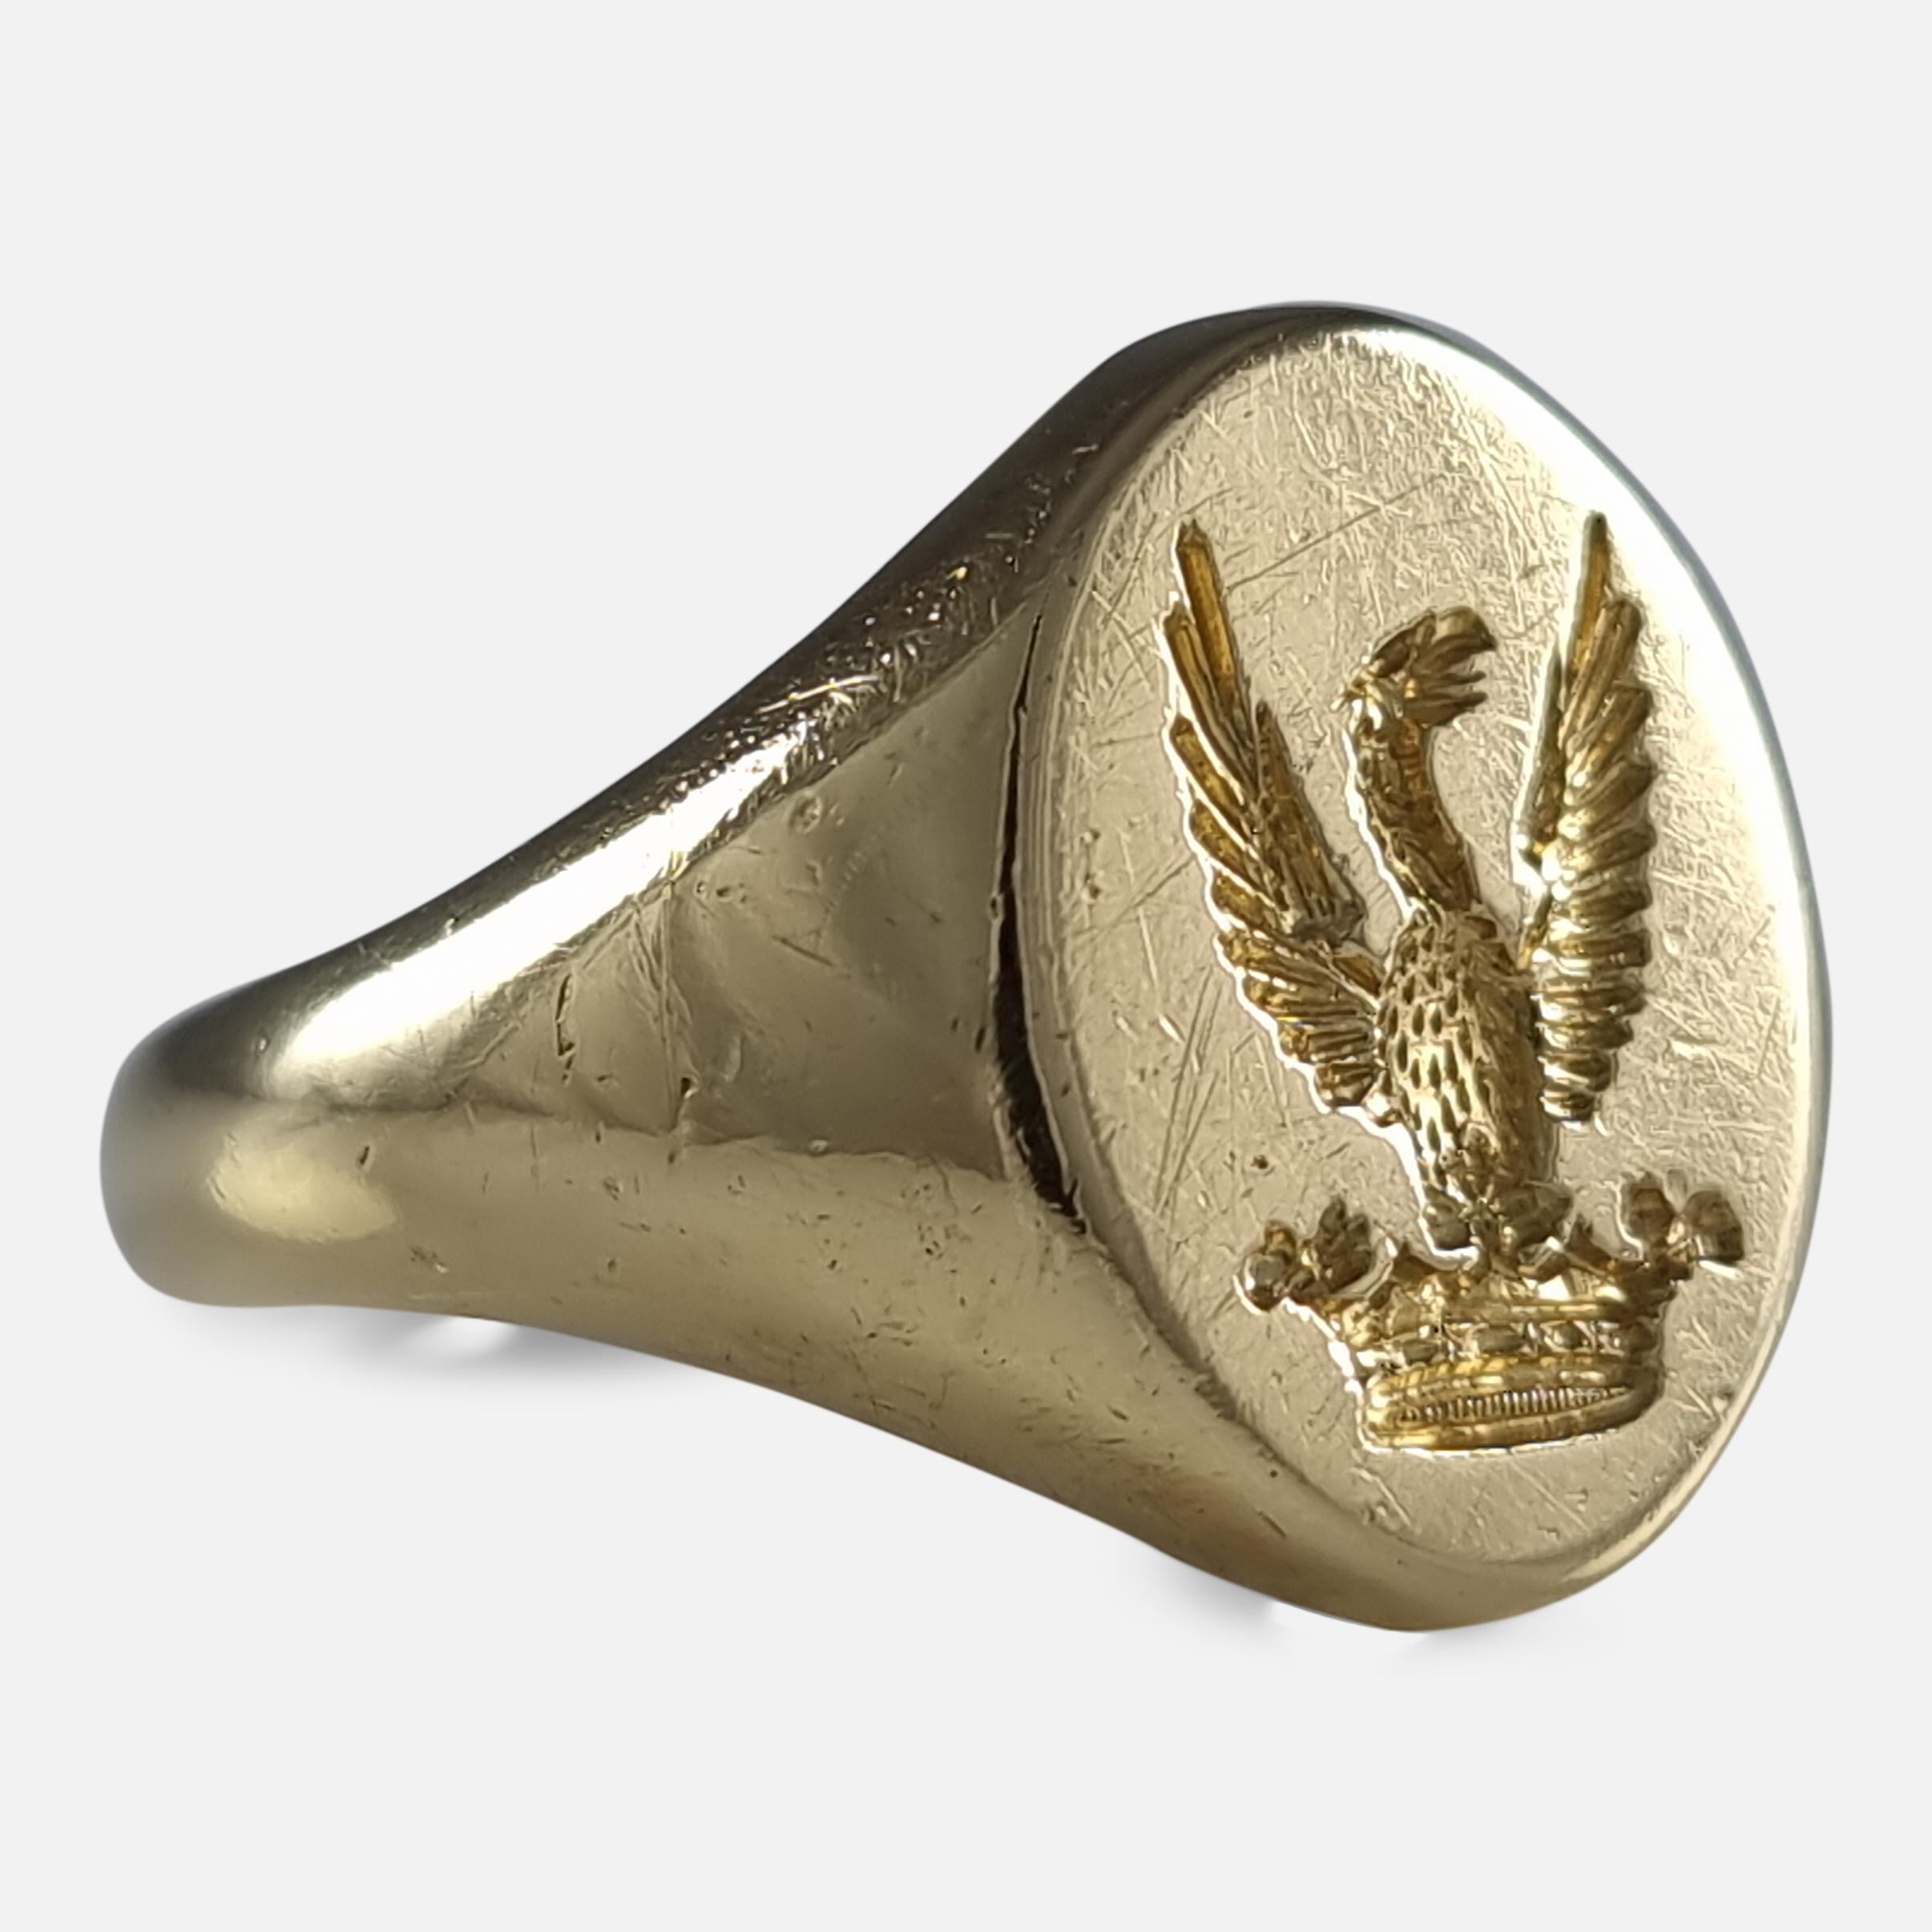 gold son ring